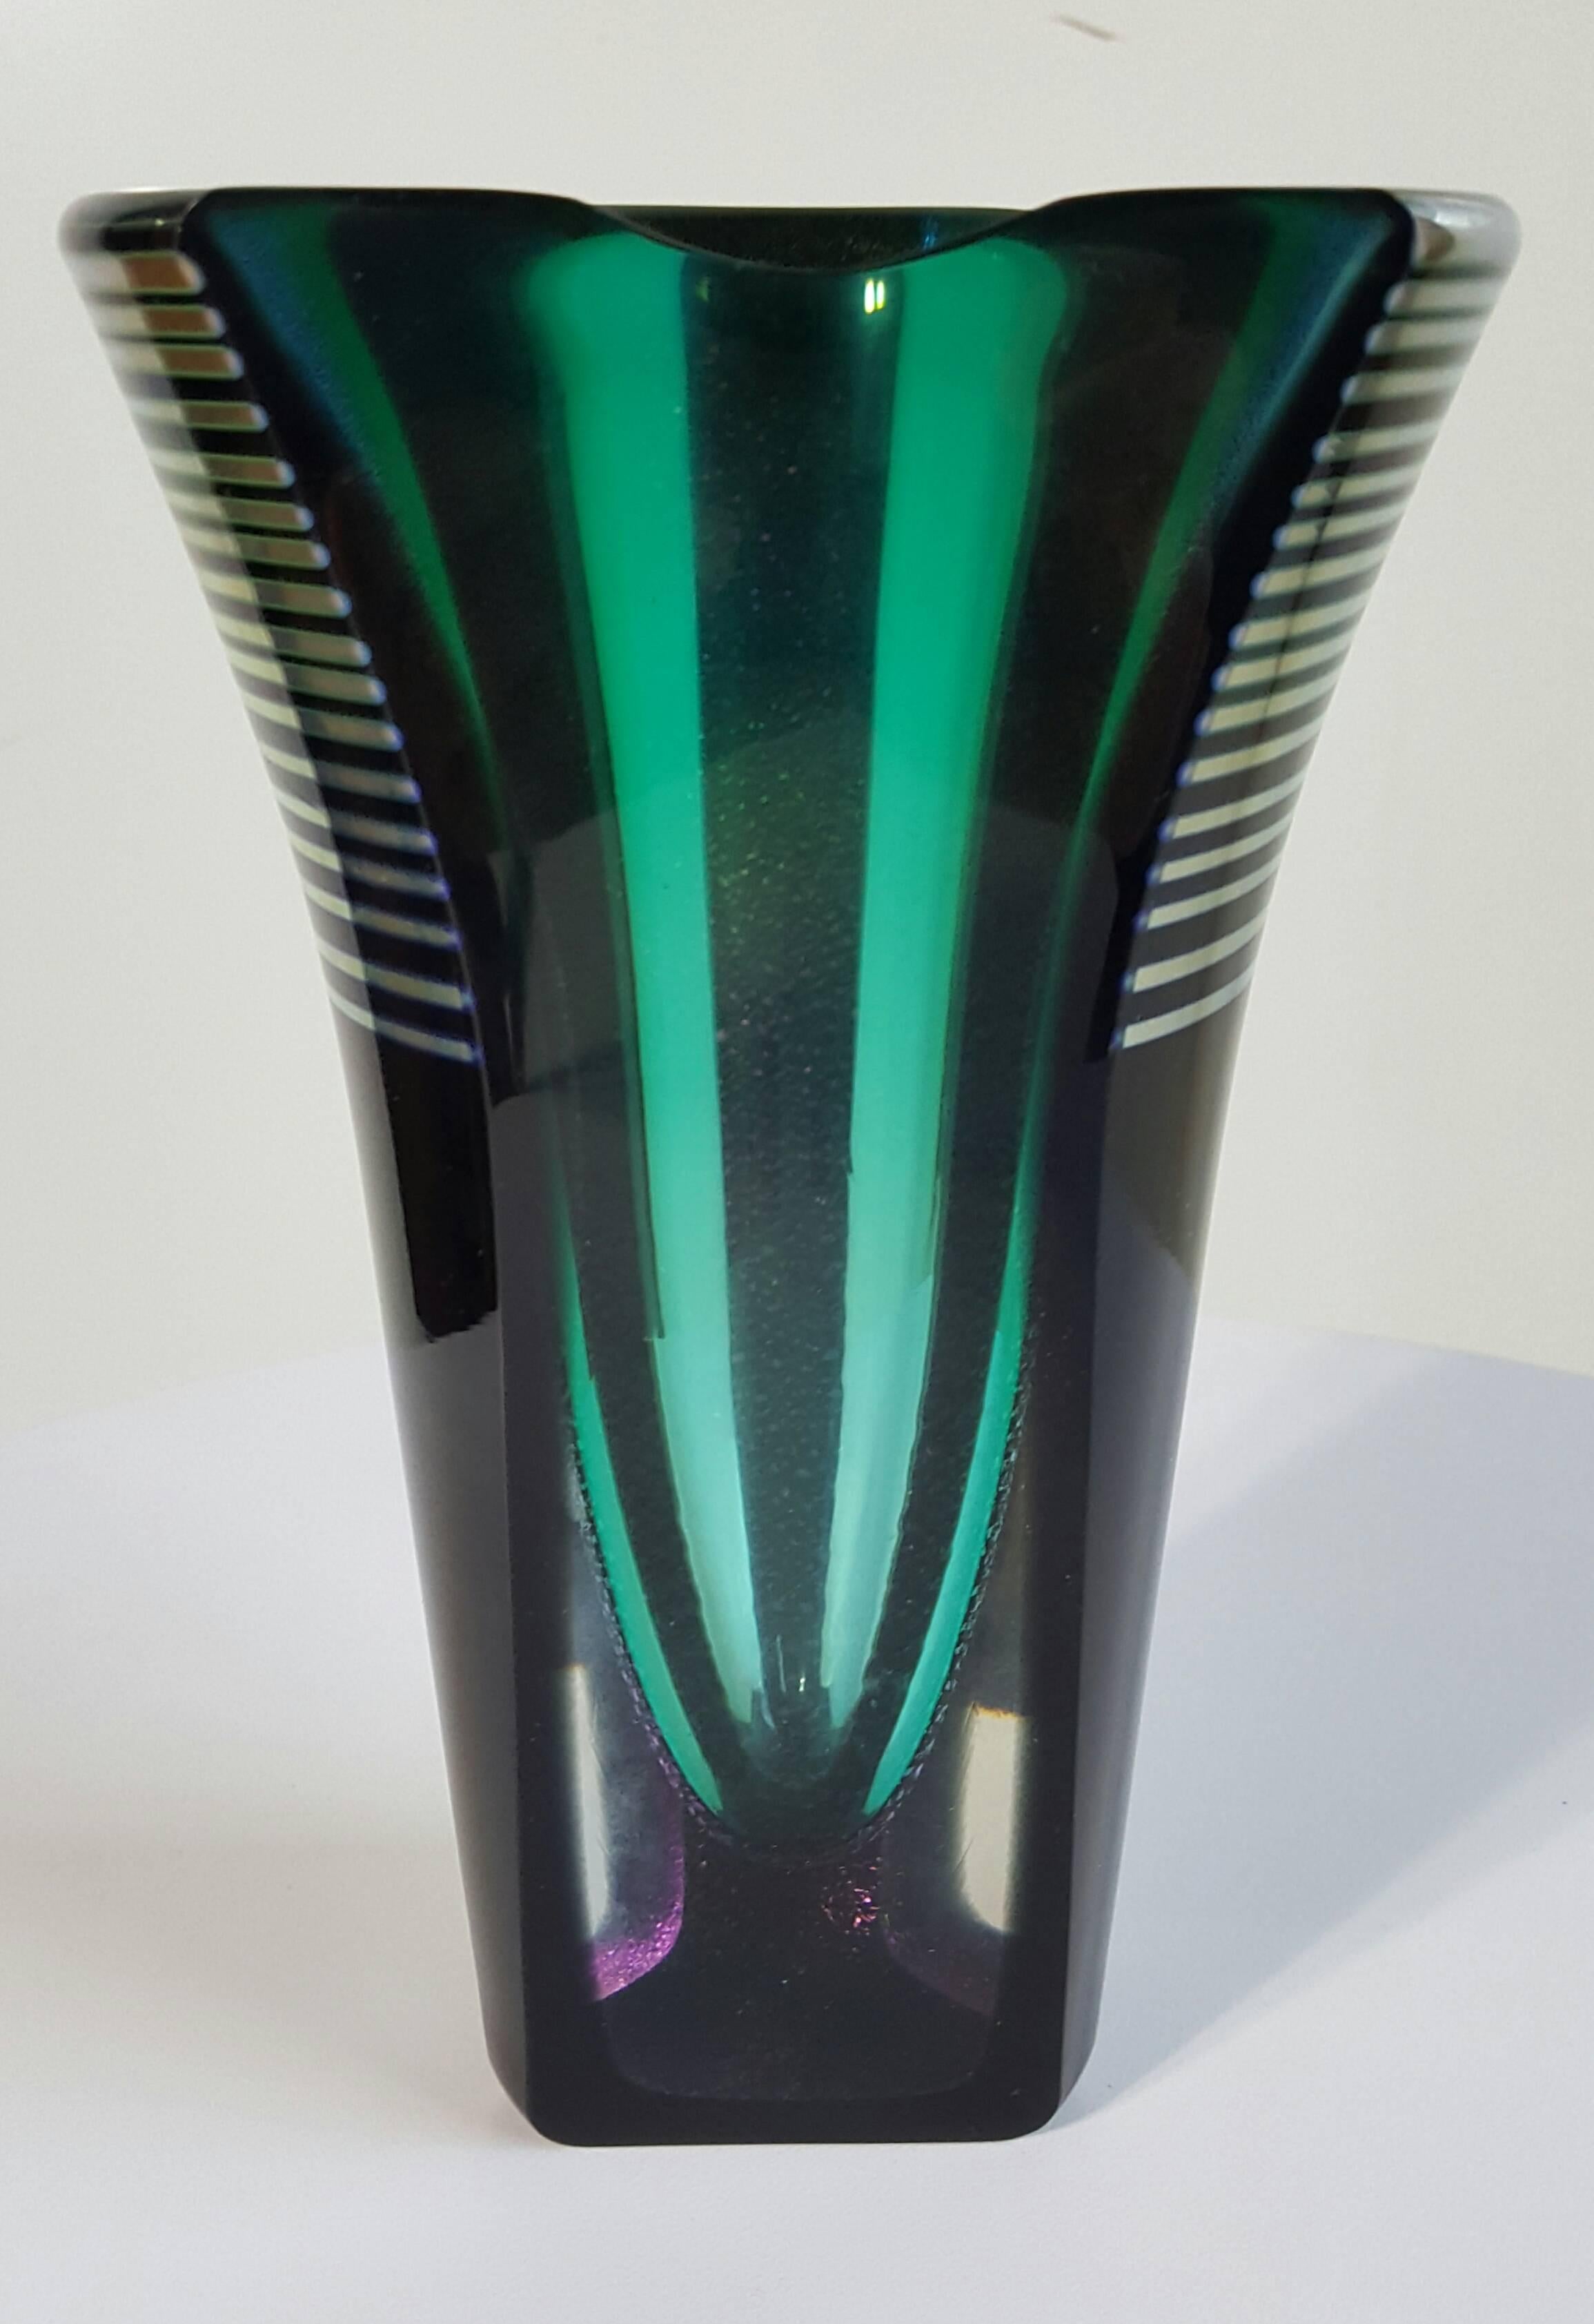 Correia Art Glass is of the highest quality and most elegant design. Its allure is the visual aesthetic of color, form and tactile sensation yet it is the perfect marriage of art and function. These pieces beg to be held and used.

The skilled